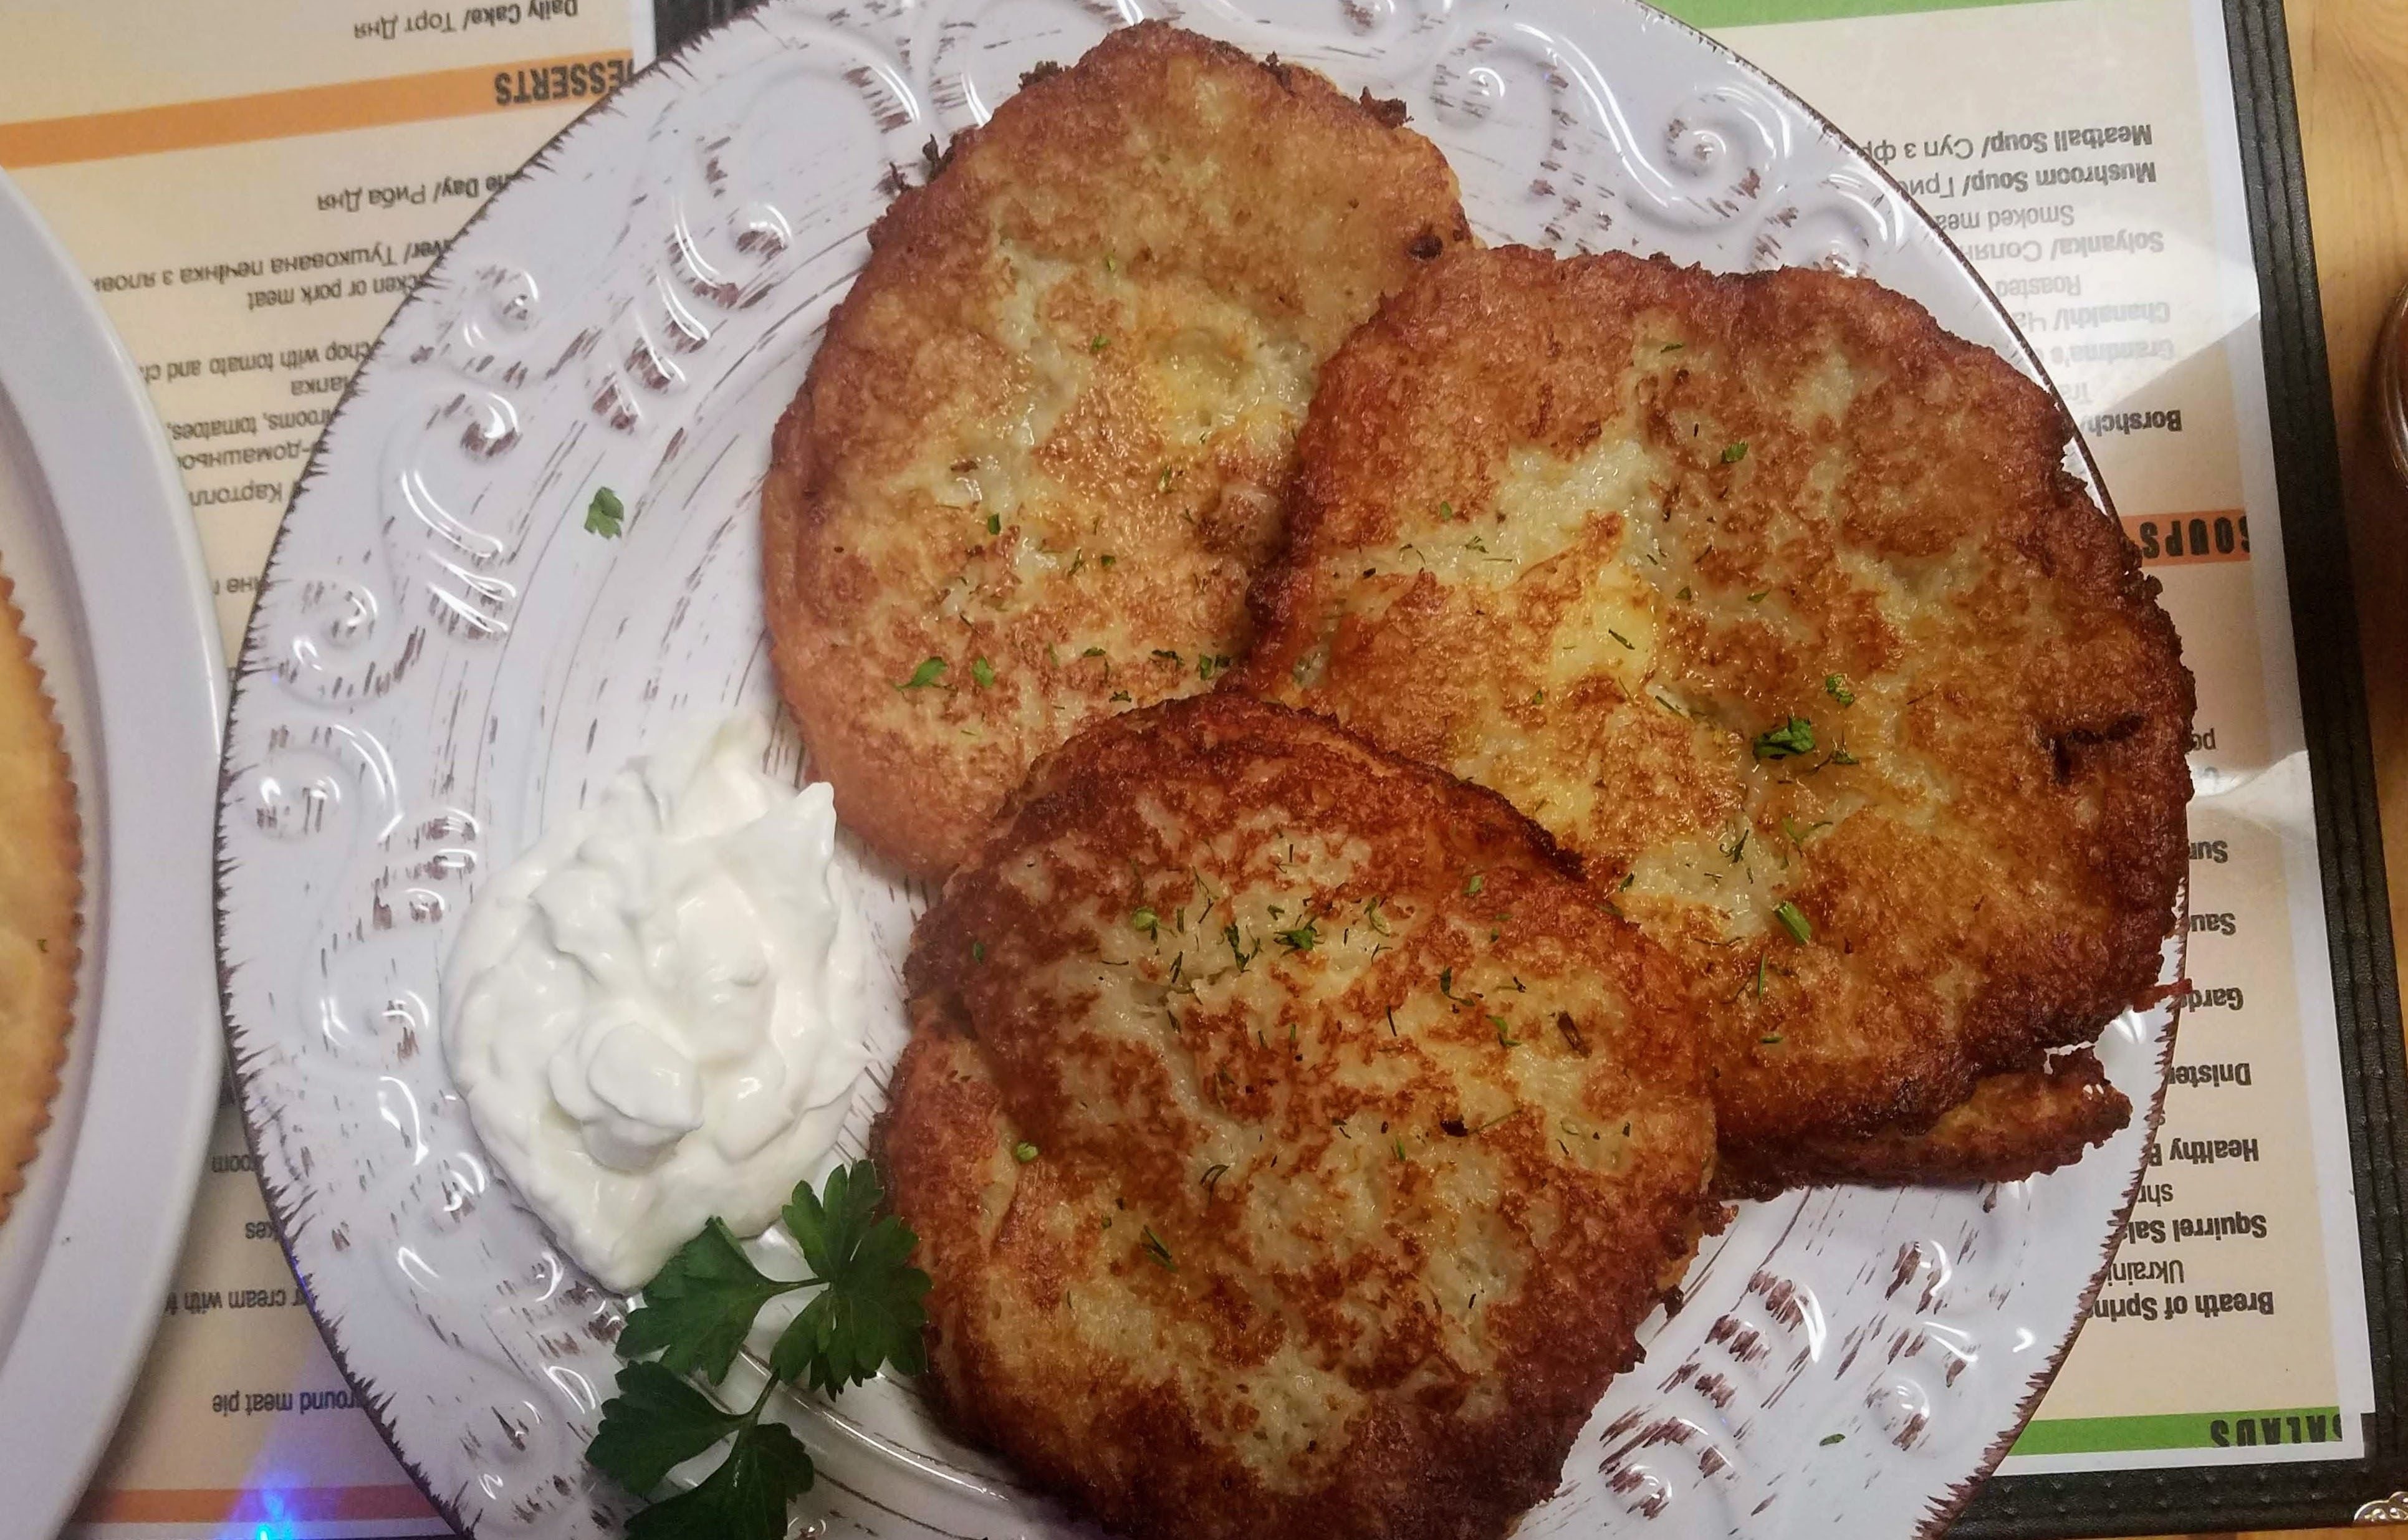 A plate of three latkes with sour cream on the side.